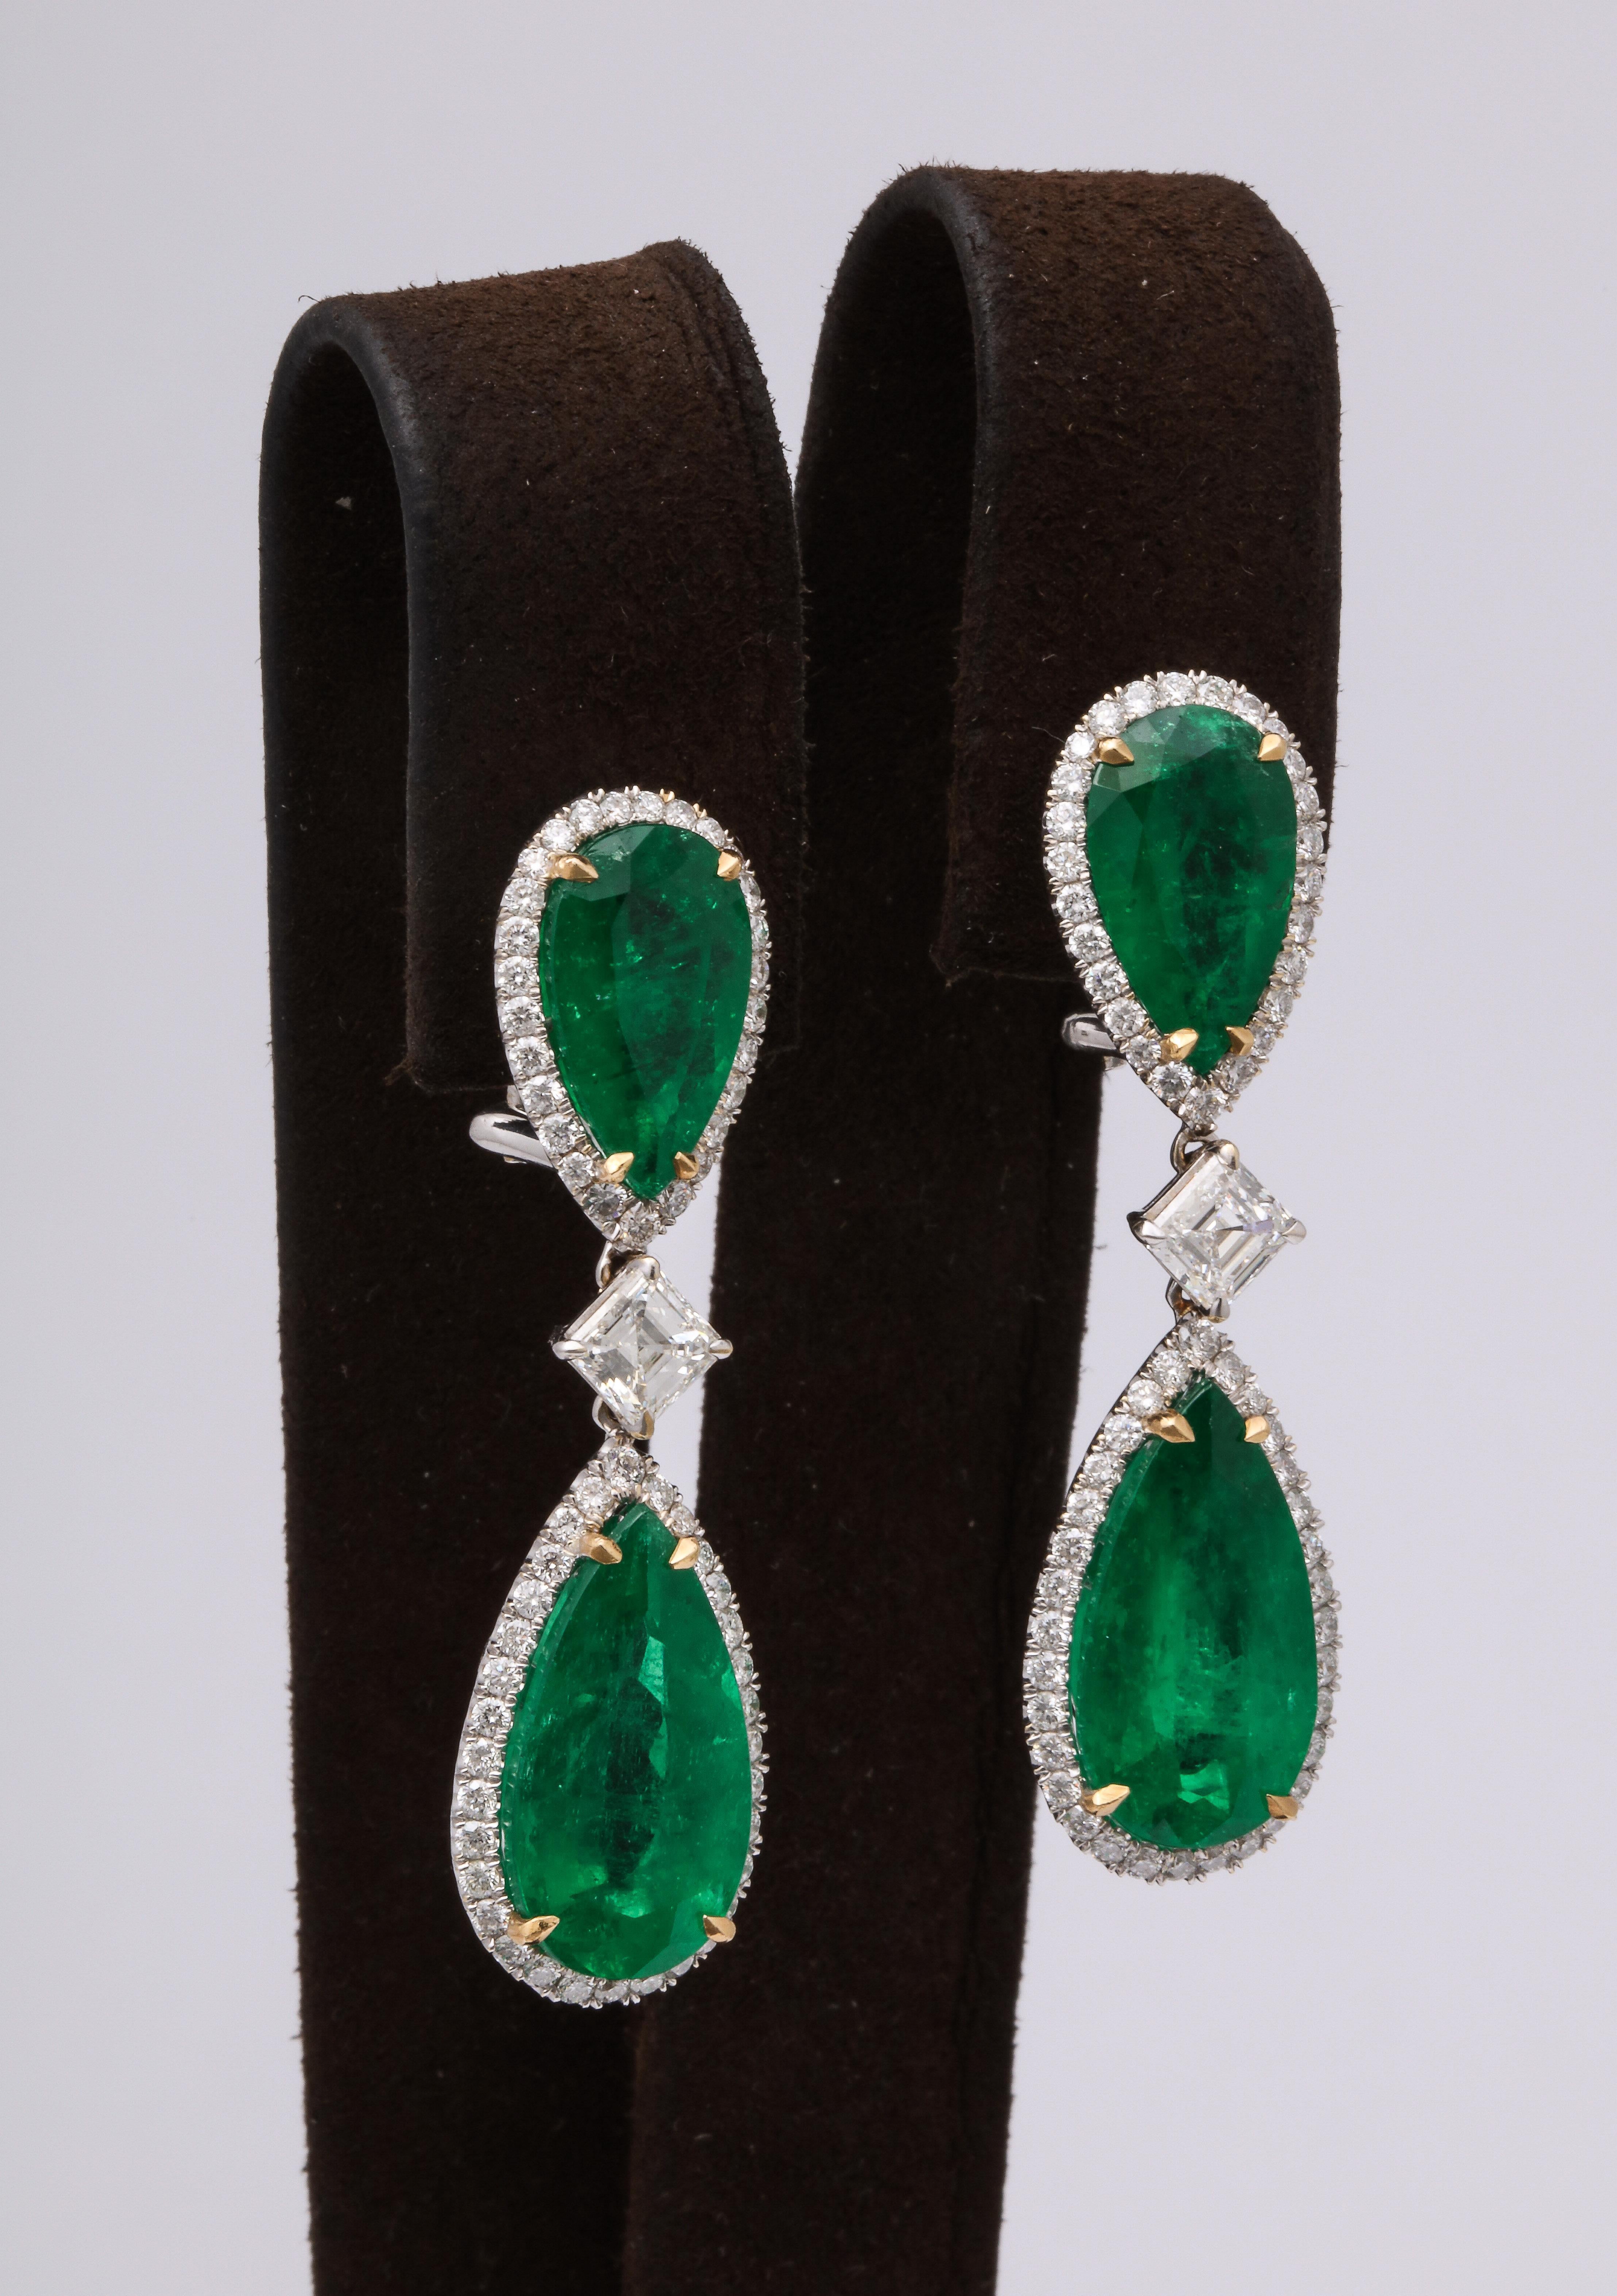 
A phenomenal pair of earrings with the perfect POP of color. 

17.71 carats of certified 